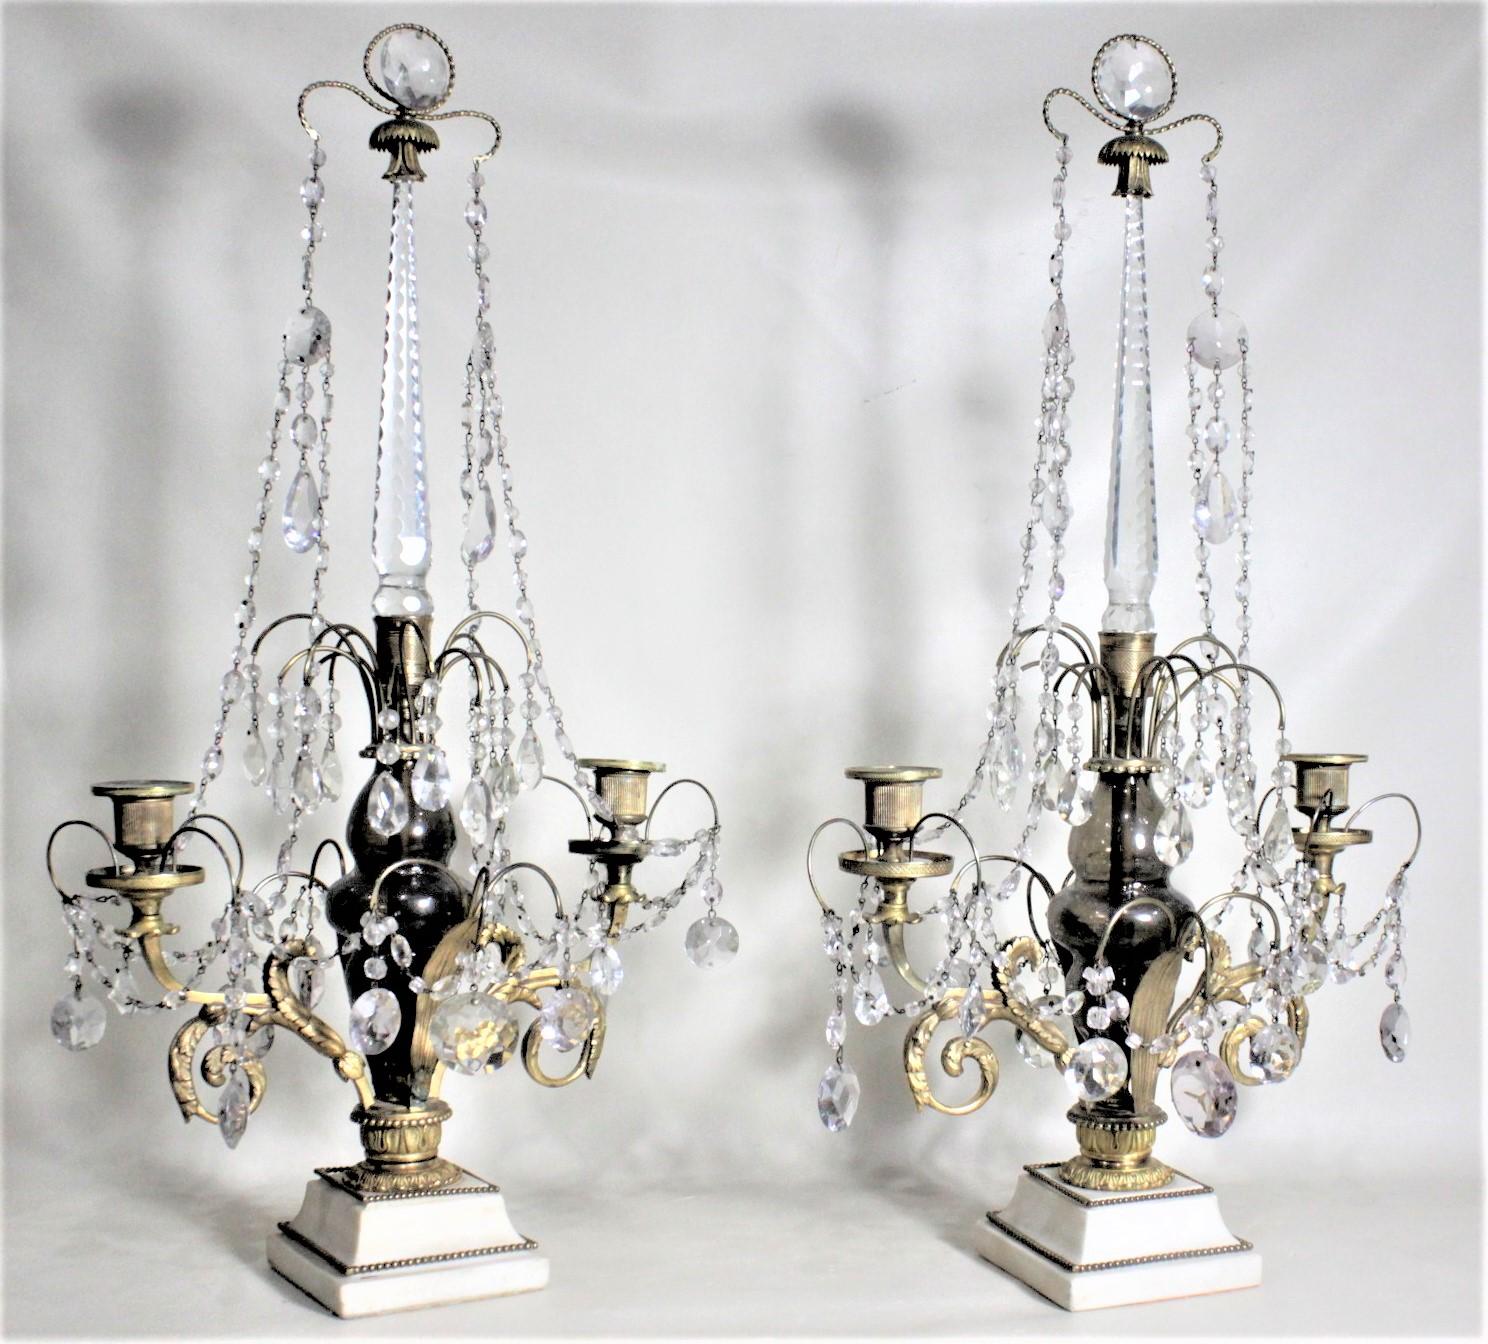 Pair of Antique Elaborate Gilt Bronze and Crystal Candelabras or Candleholders For Sale 1